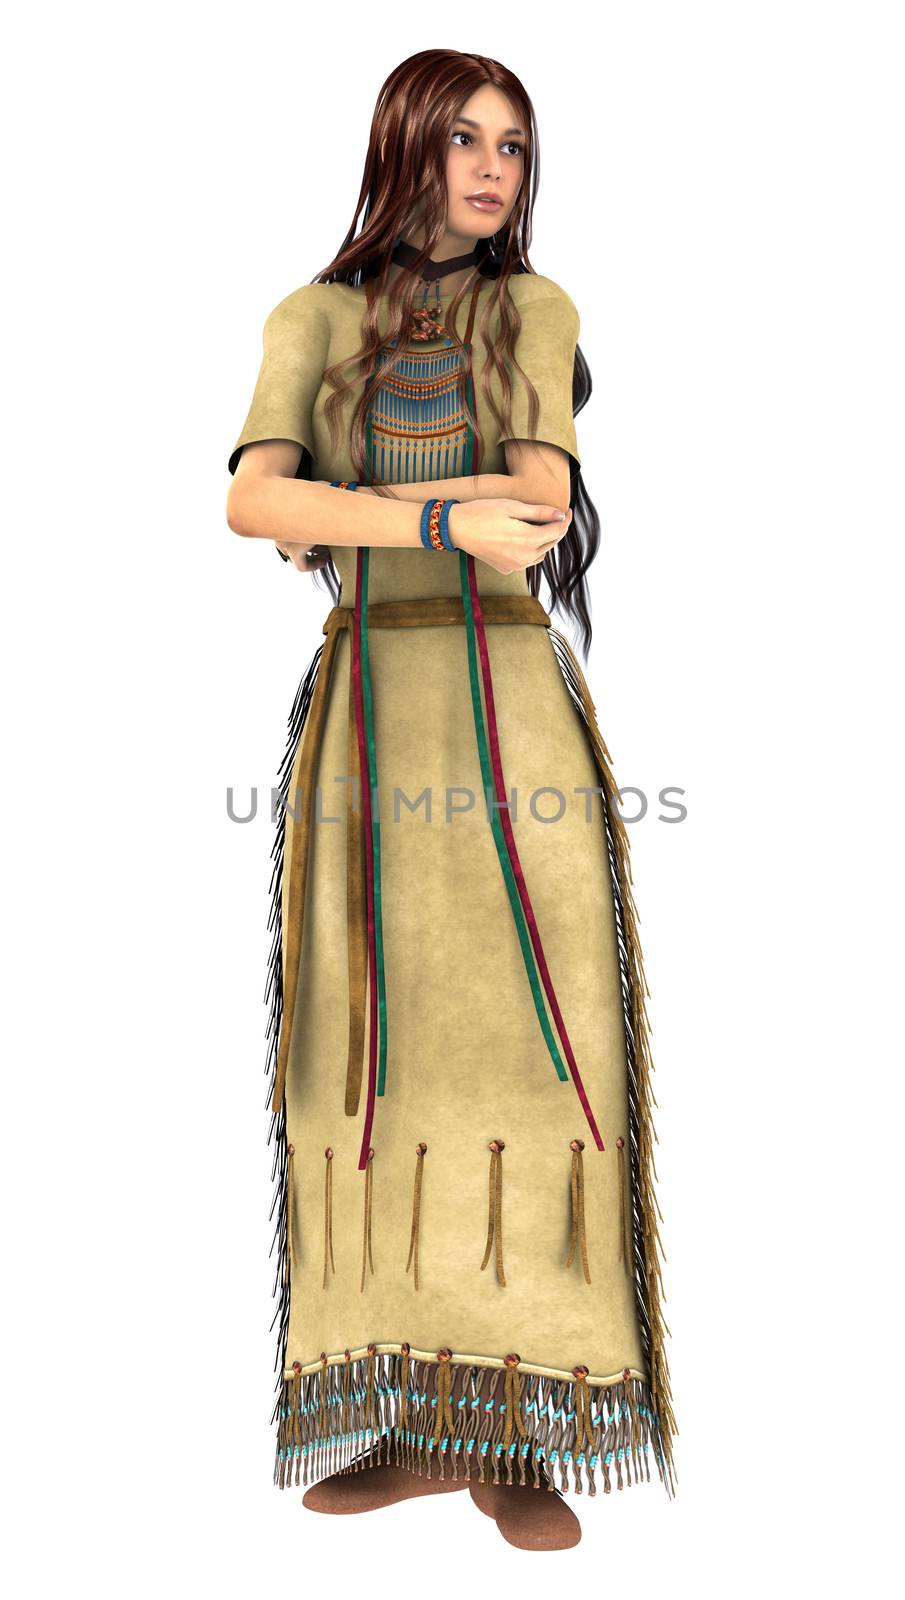 Native American Young Woman by Vac